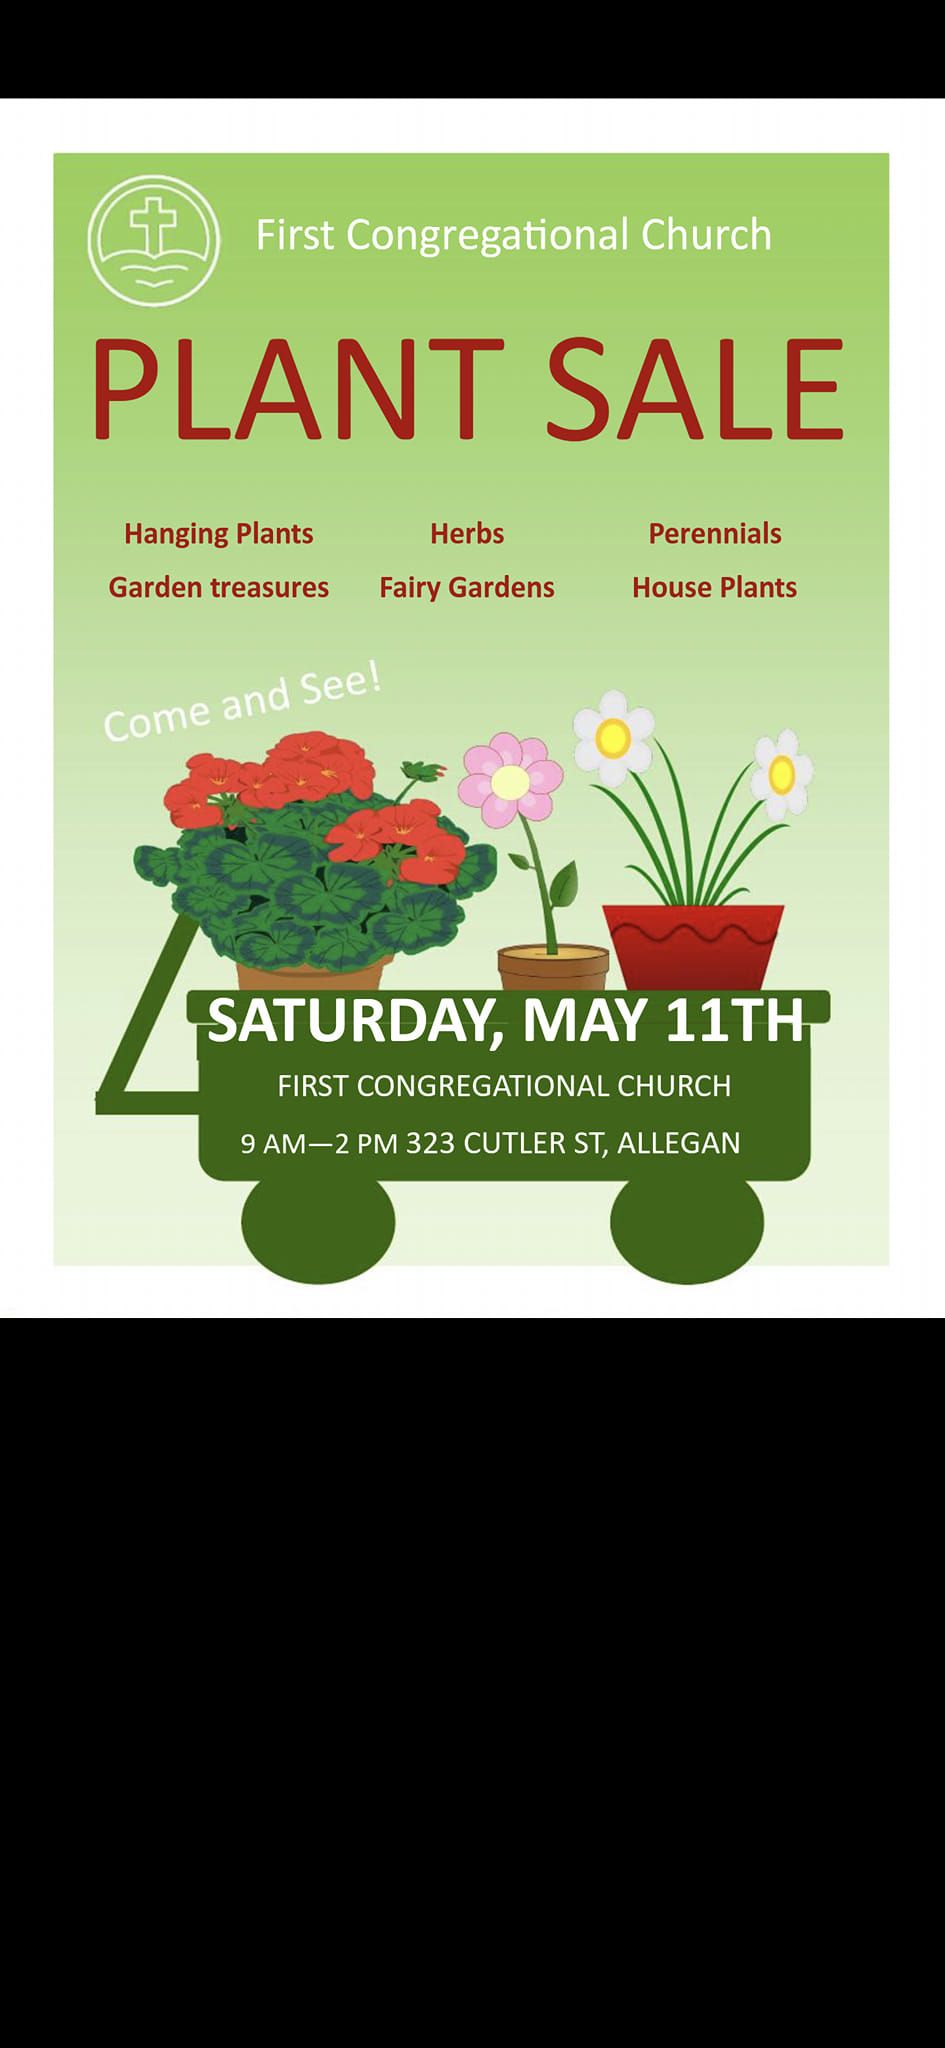 First Congregational Church plant sale 